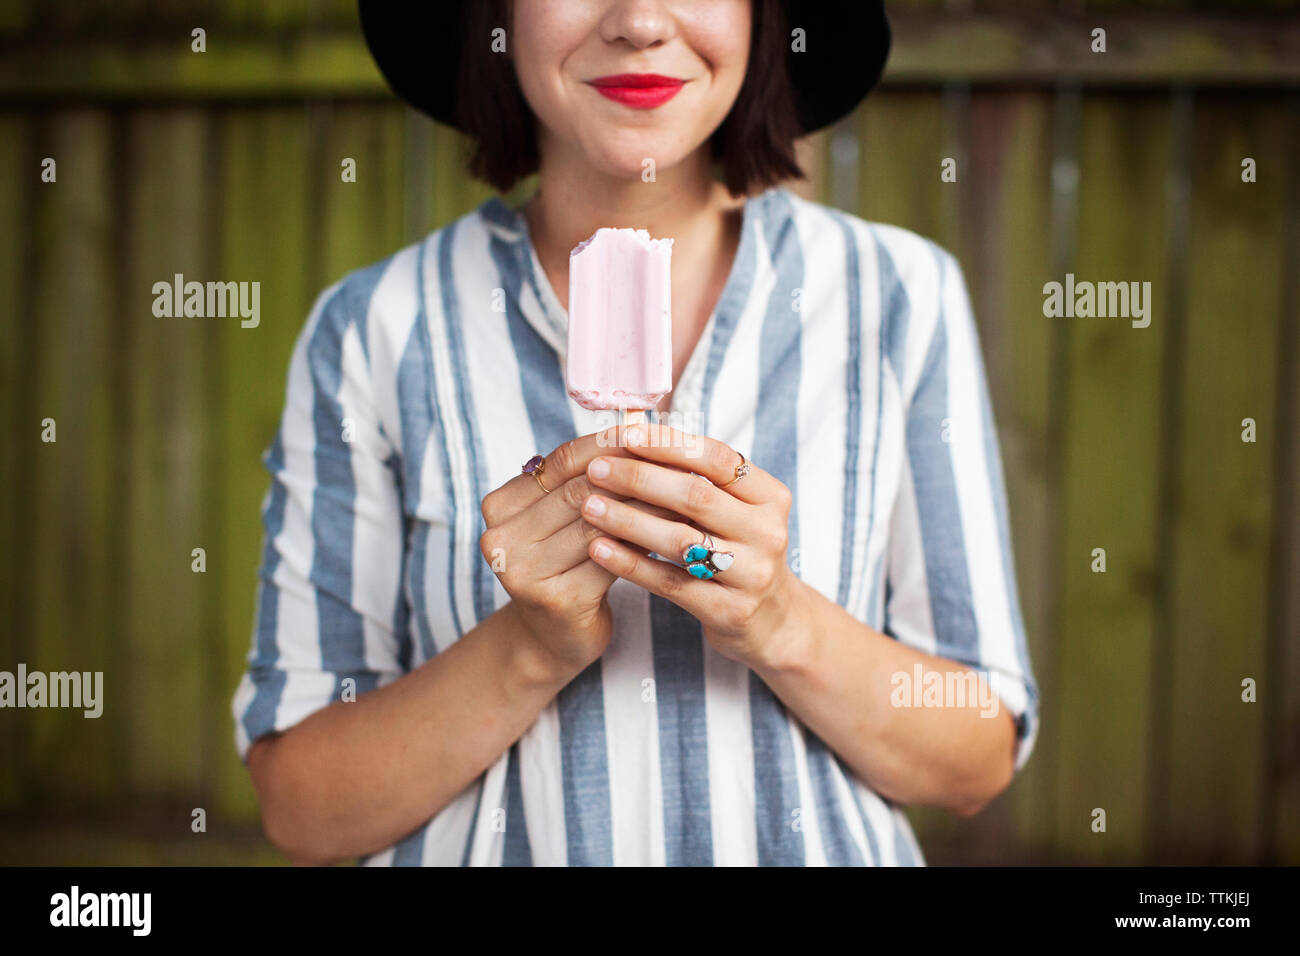 Midsection of smiling woman holding popsicle Stock Photo